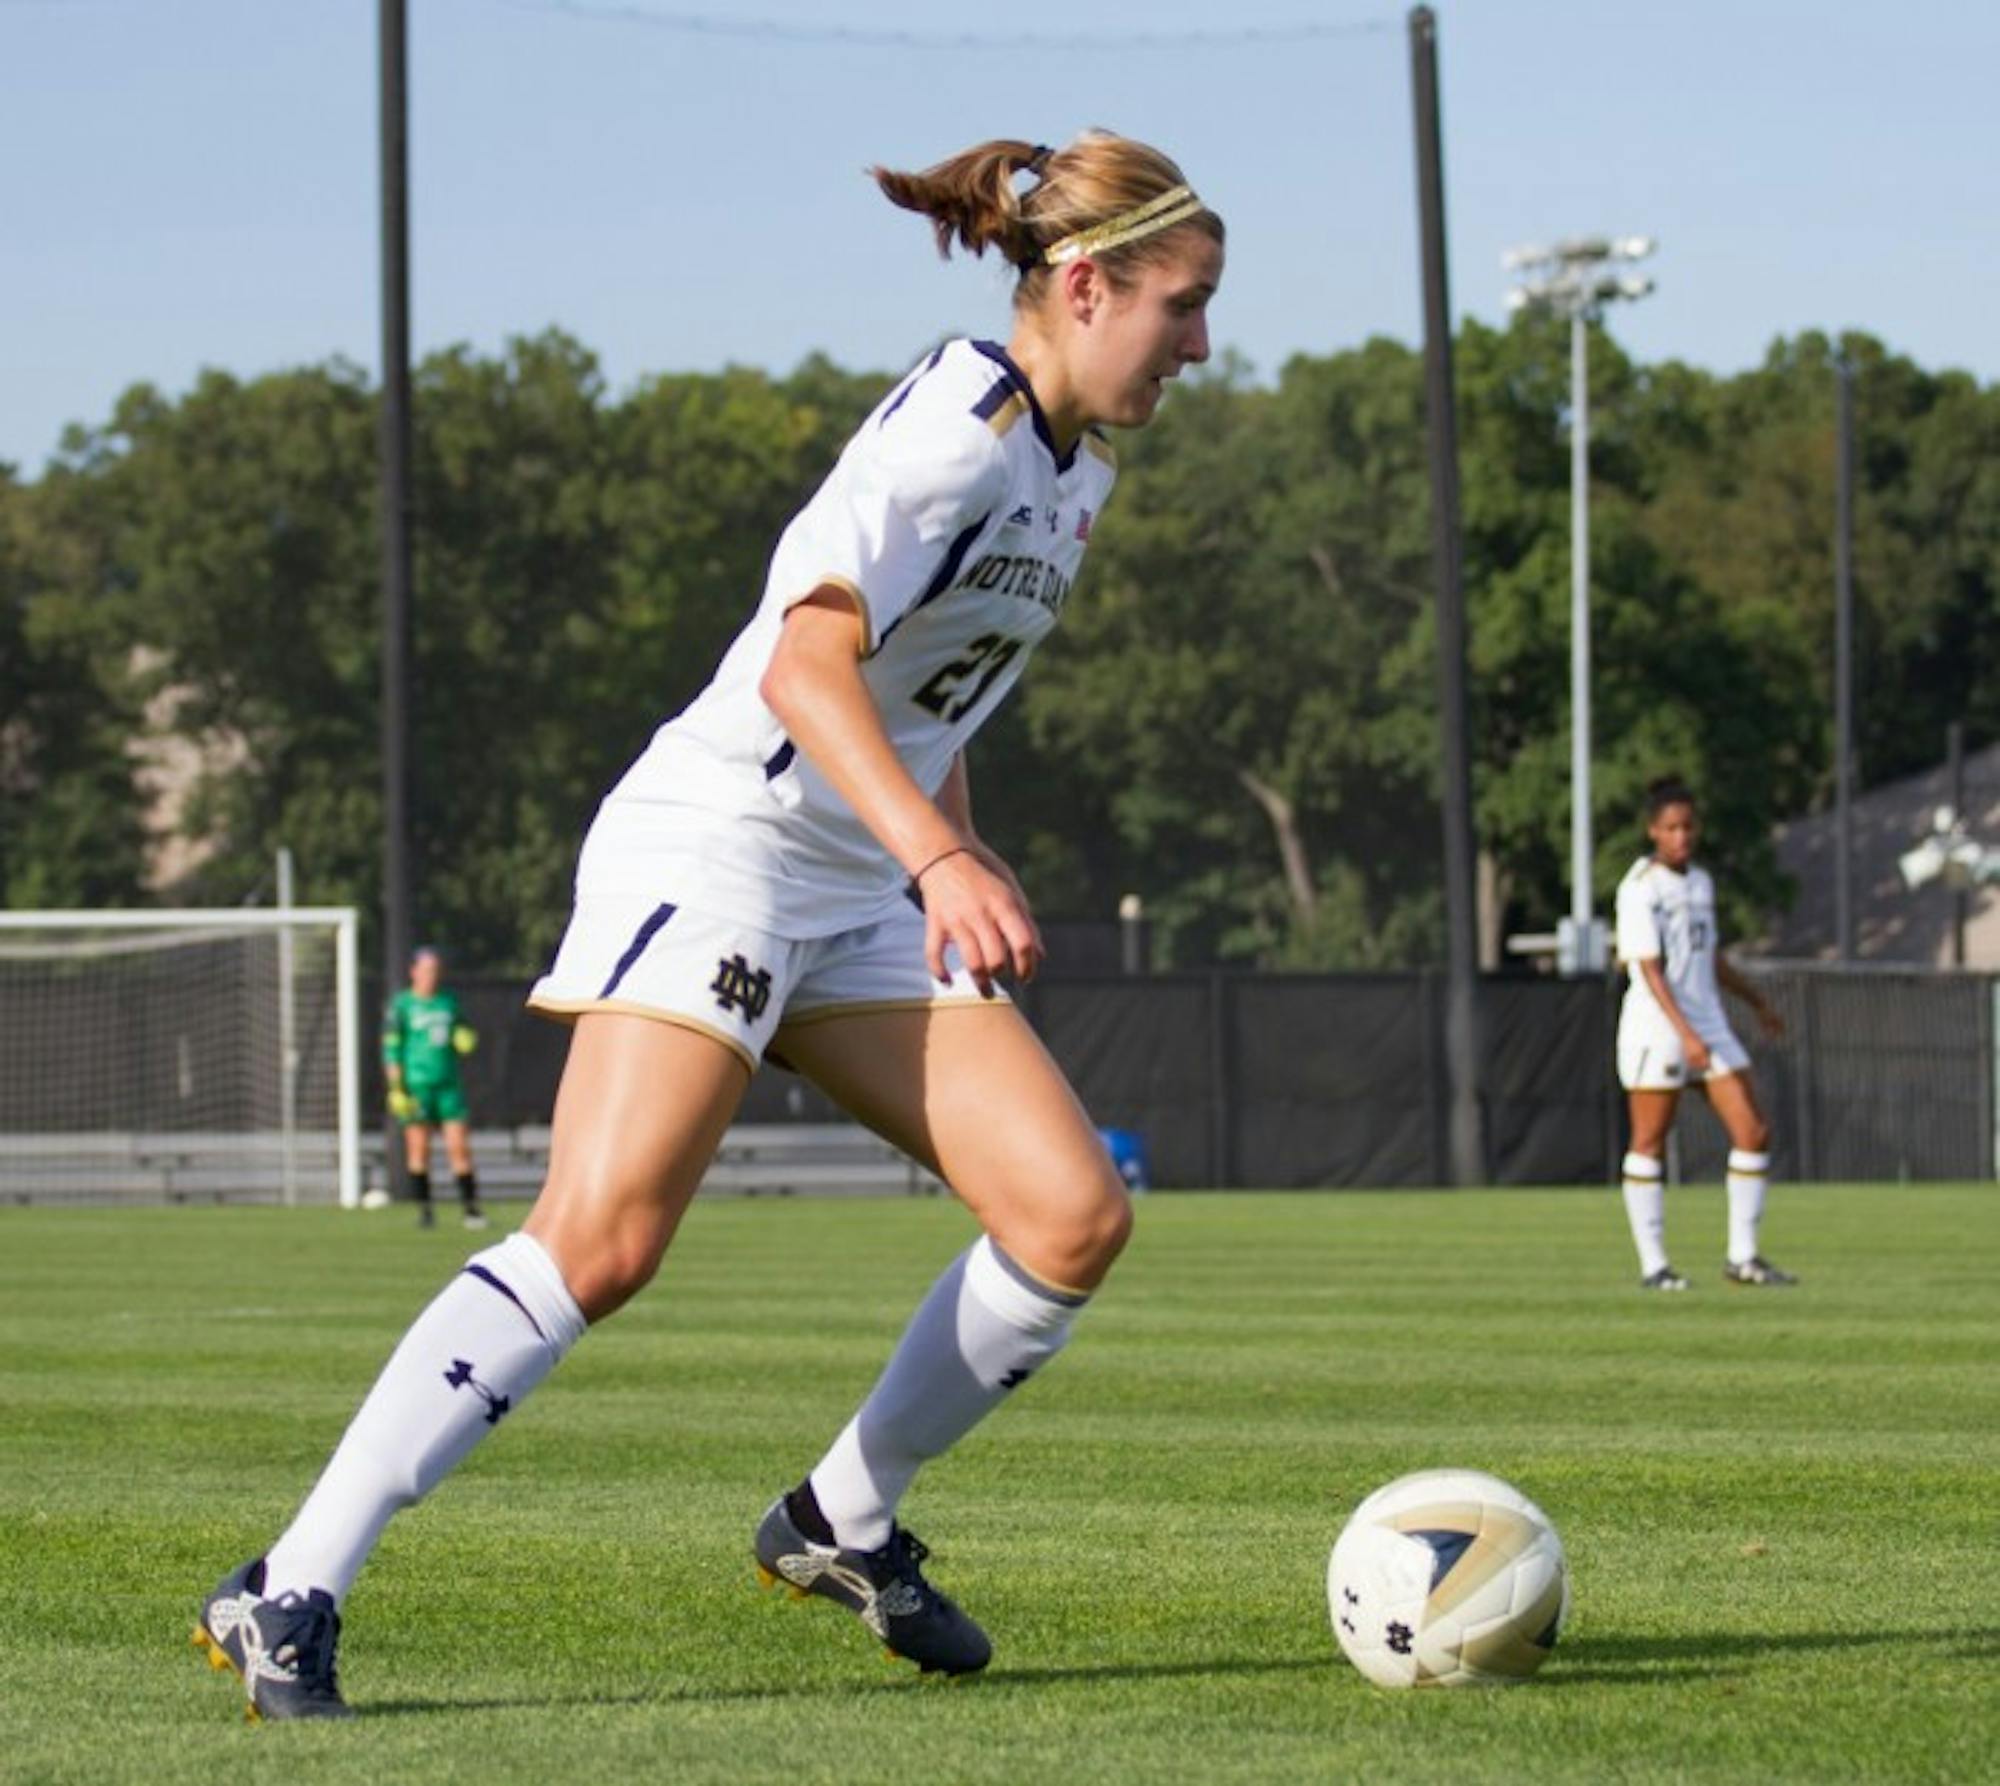 Irish senior forward Kaleigh Olmsted dribbles the ball during Notre Dame’s 1-0 win over Missouri on Sept. 4 at Alumni Stadium.